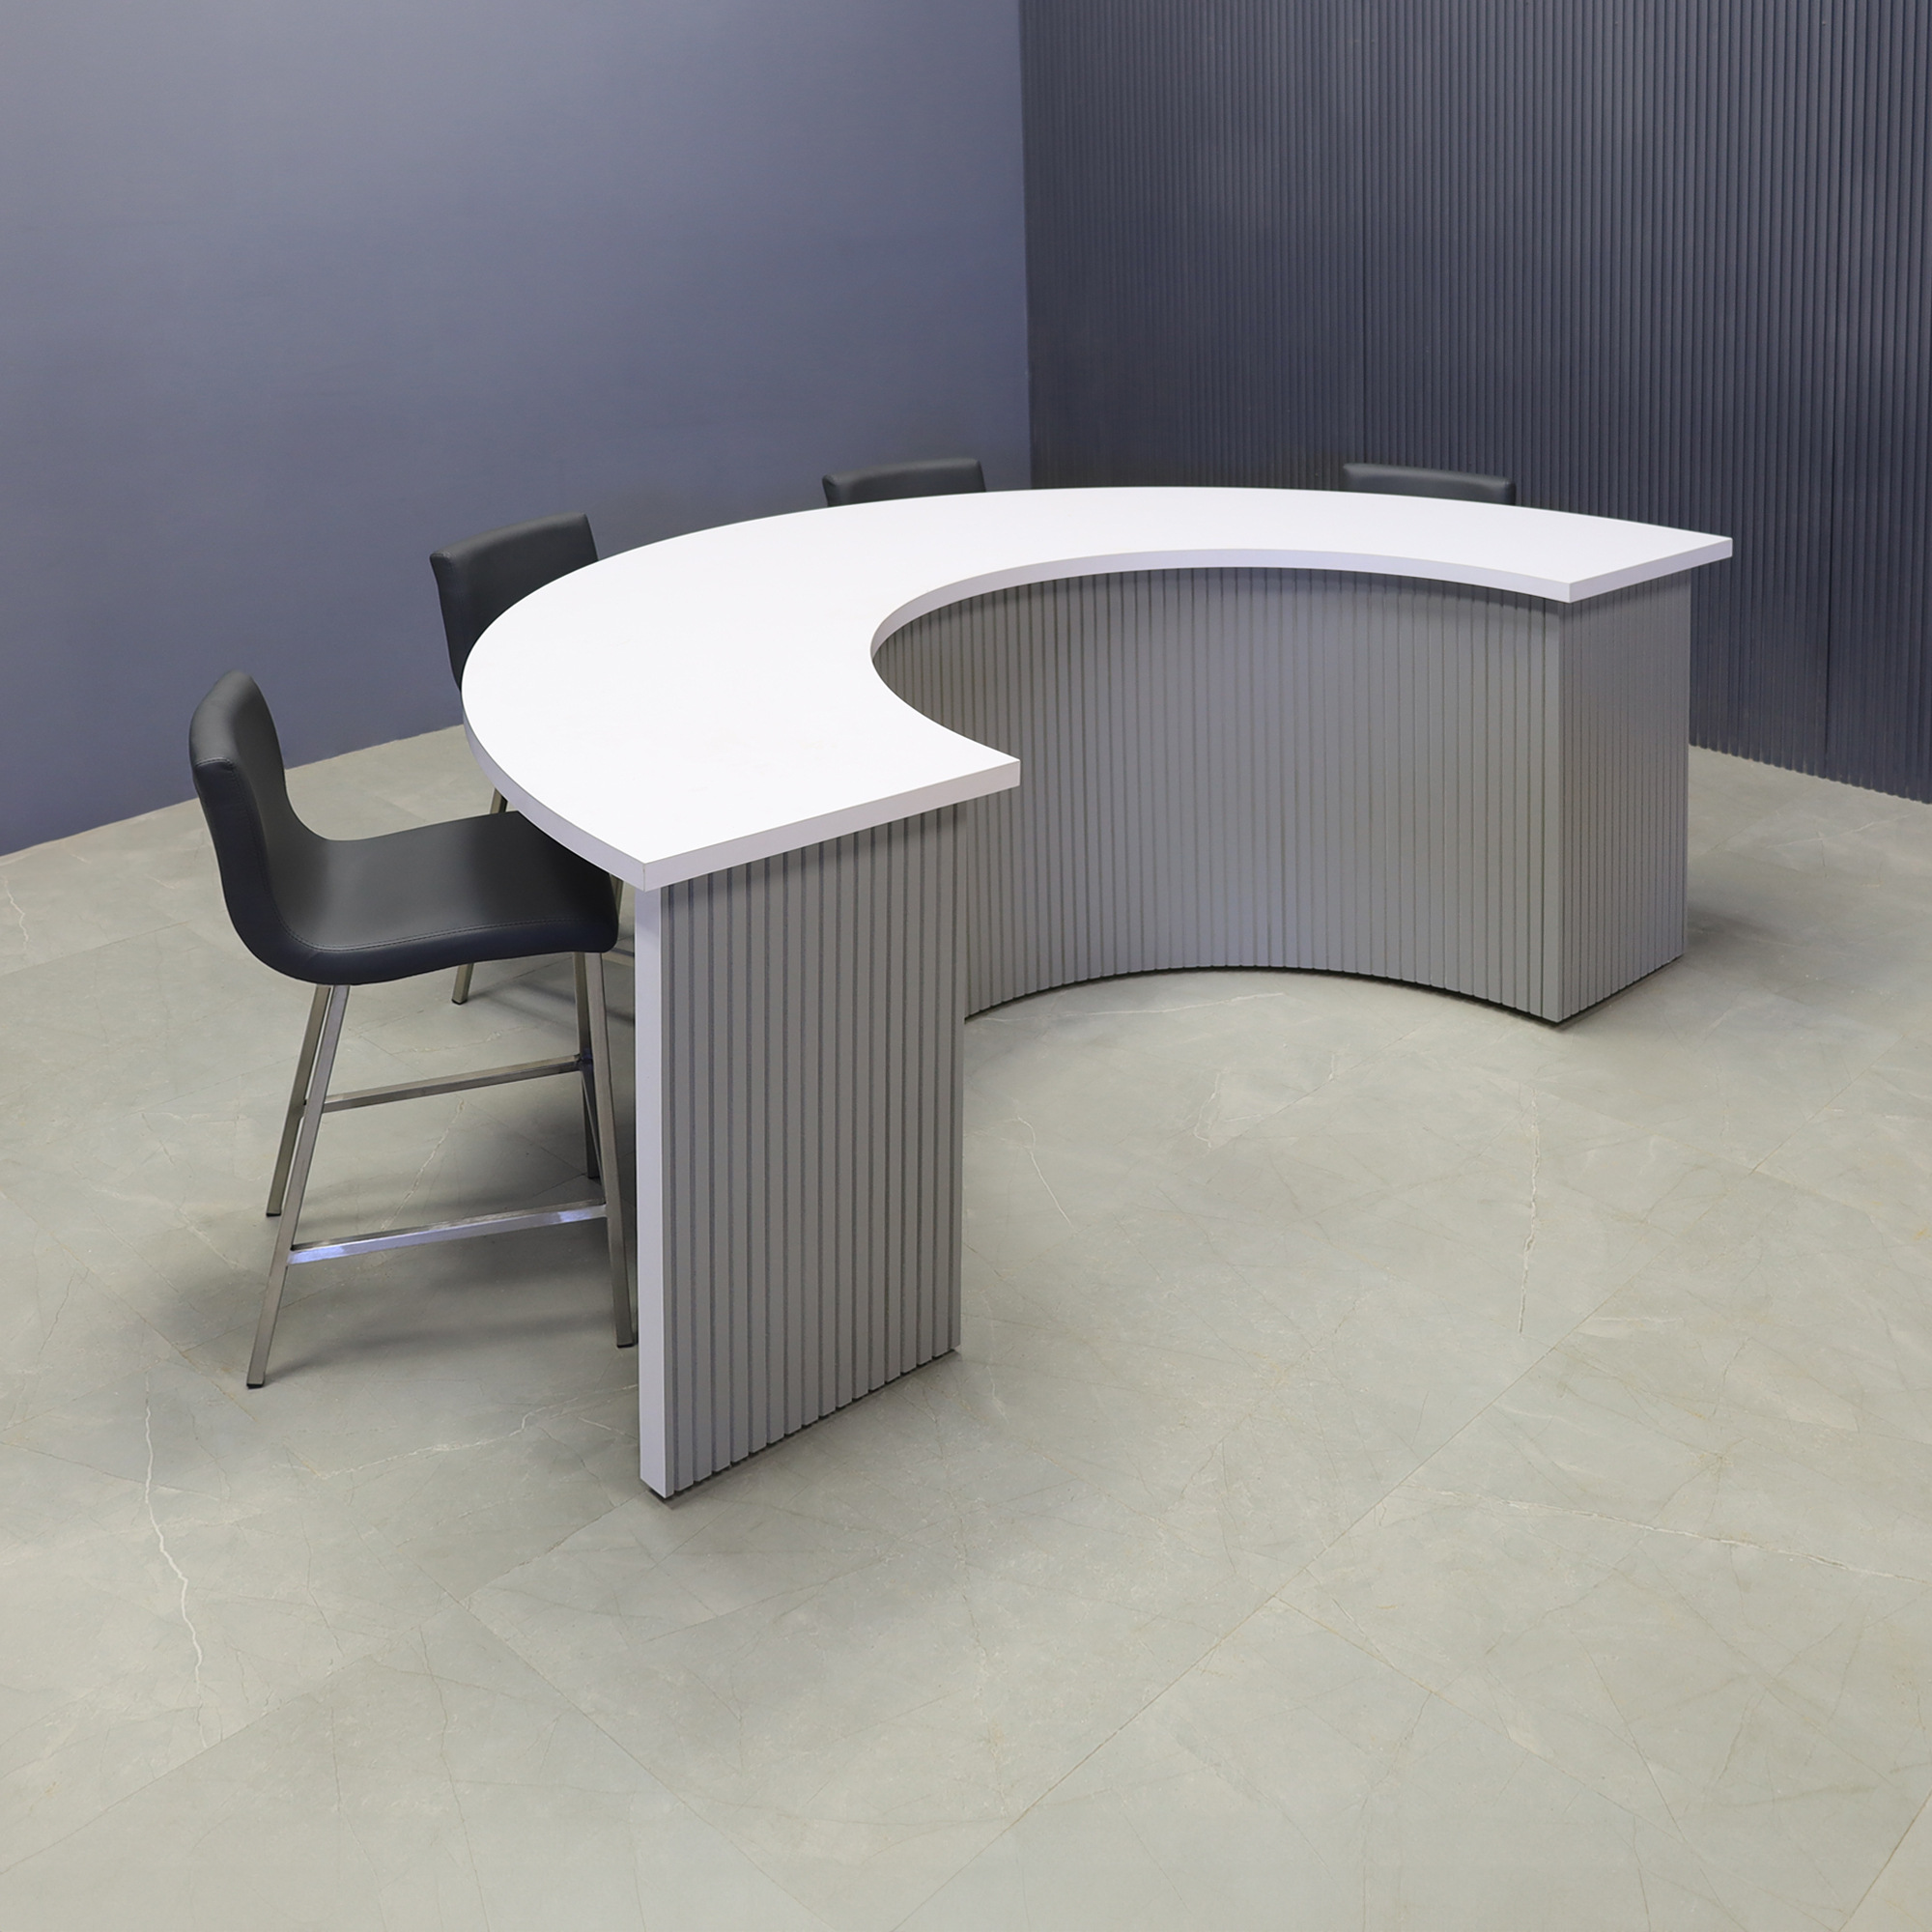 90-inch Modern Custom Podcast Table in white matte laminate top, fog gray tambour front side and white matte laminate inside, shown here.